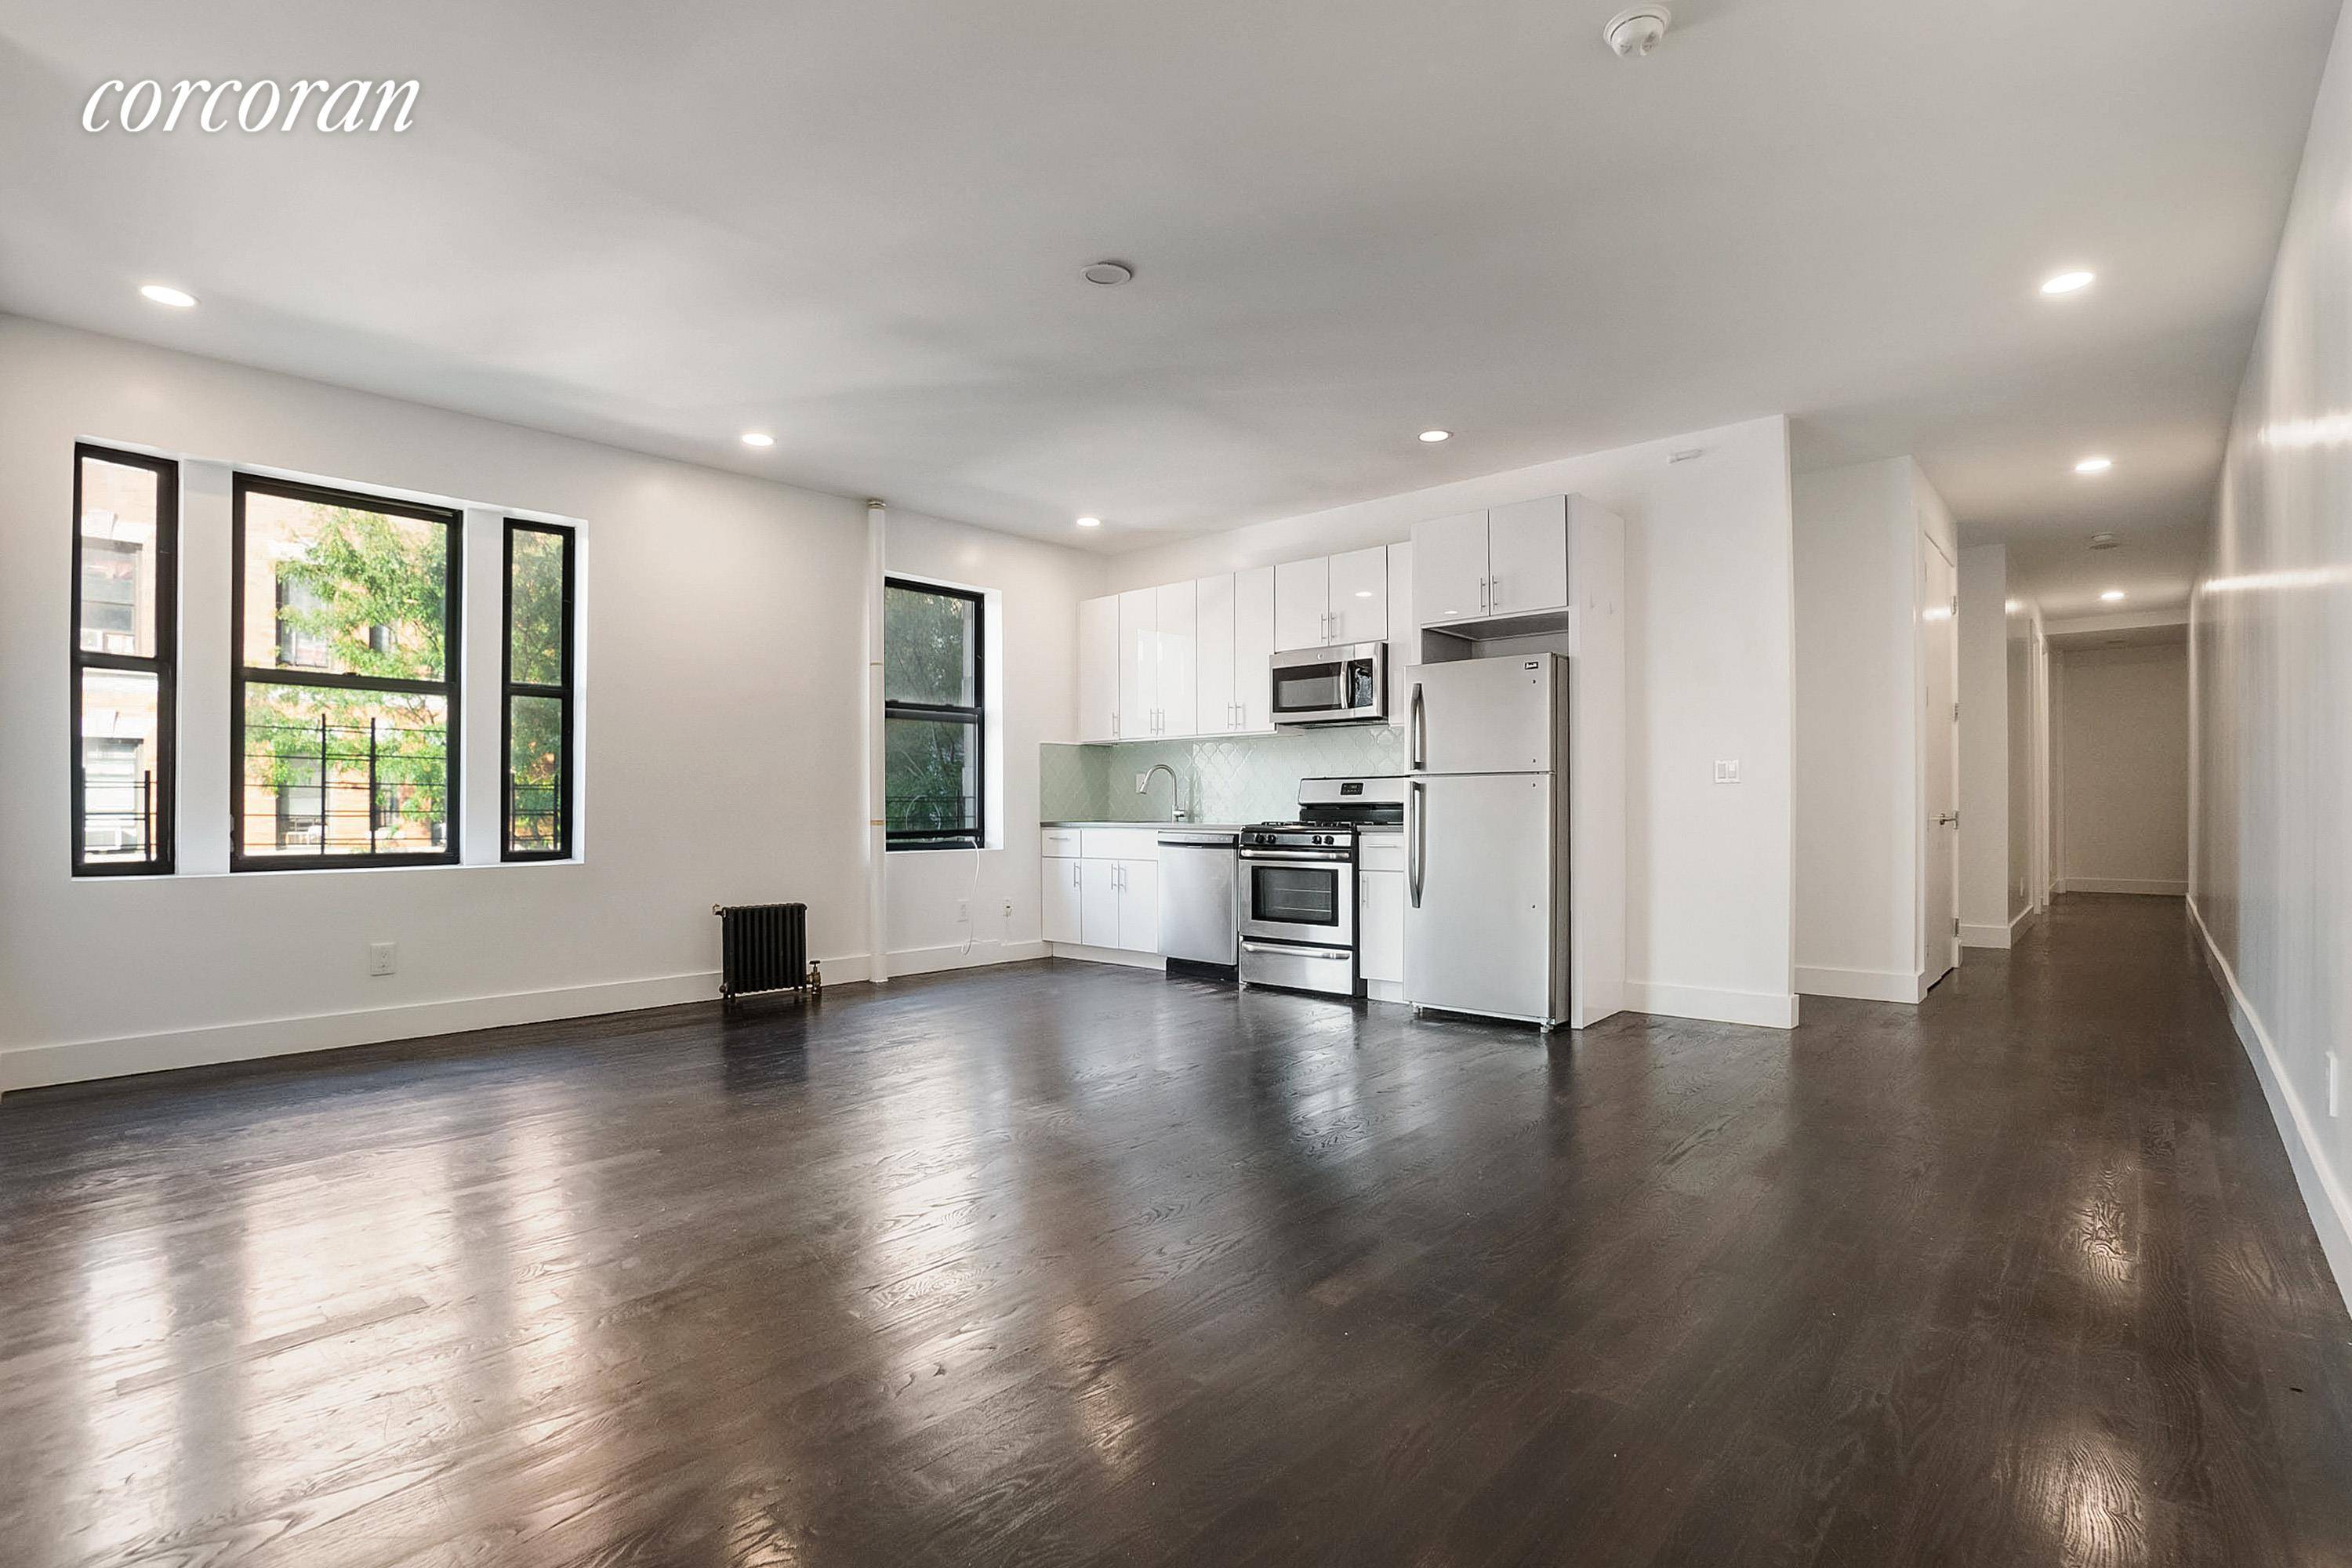 NO BROKER FEE ! 1400 Square Feet throughout this 4 Bedroom 2 Full Bath a Washer Dryer in a Prewar elevator building situated 1 block from the West 157th Street ...